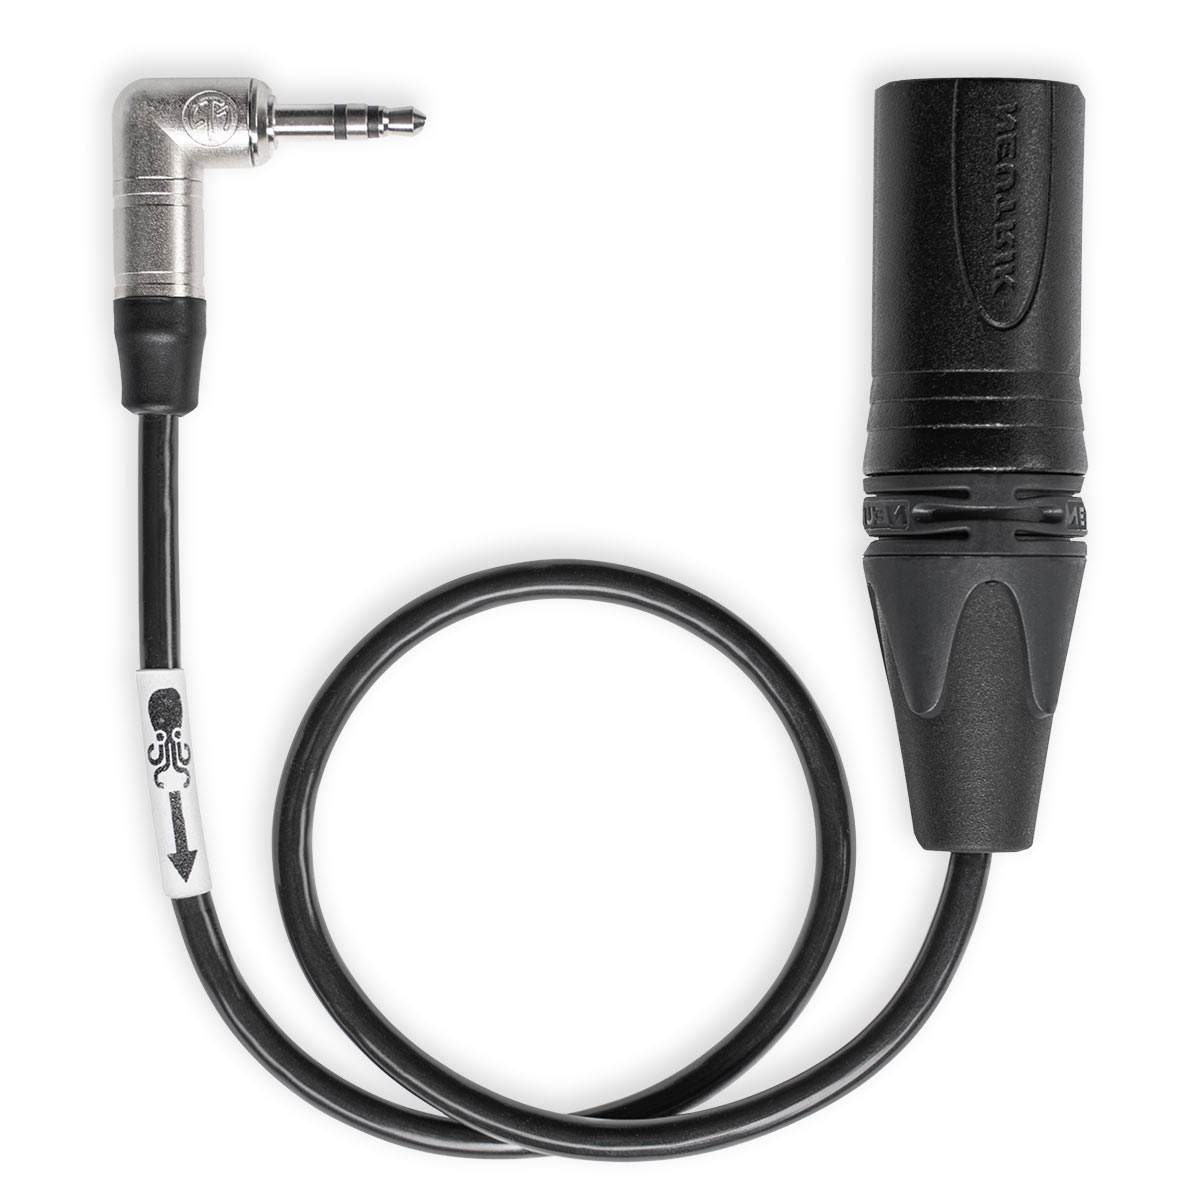 Tentacle Sync Adapter Cable for Tentacle Timecode Generator to XLR ...